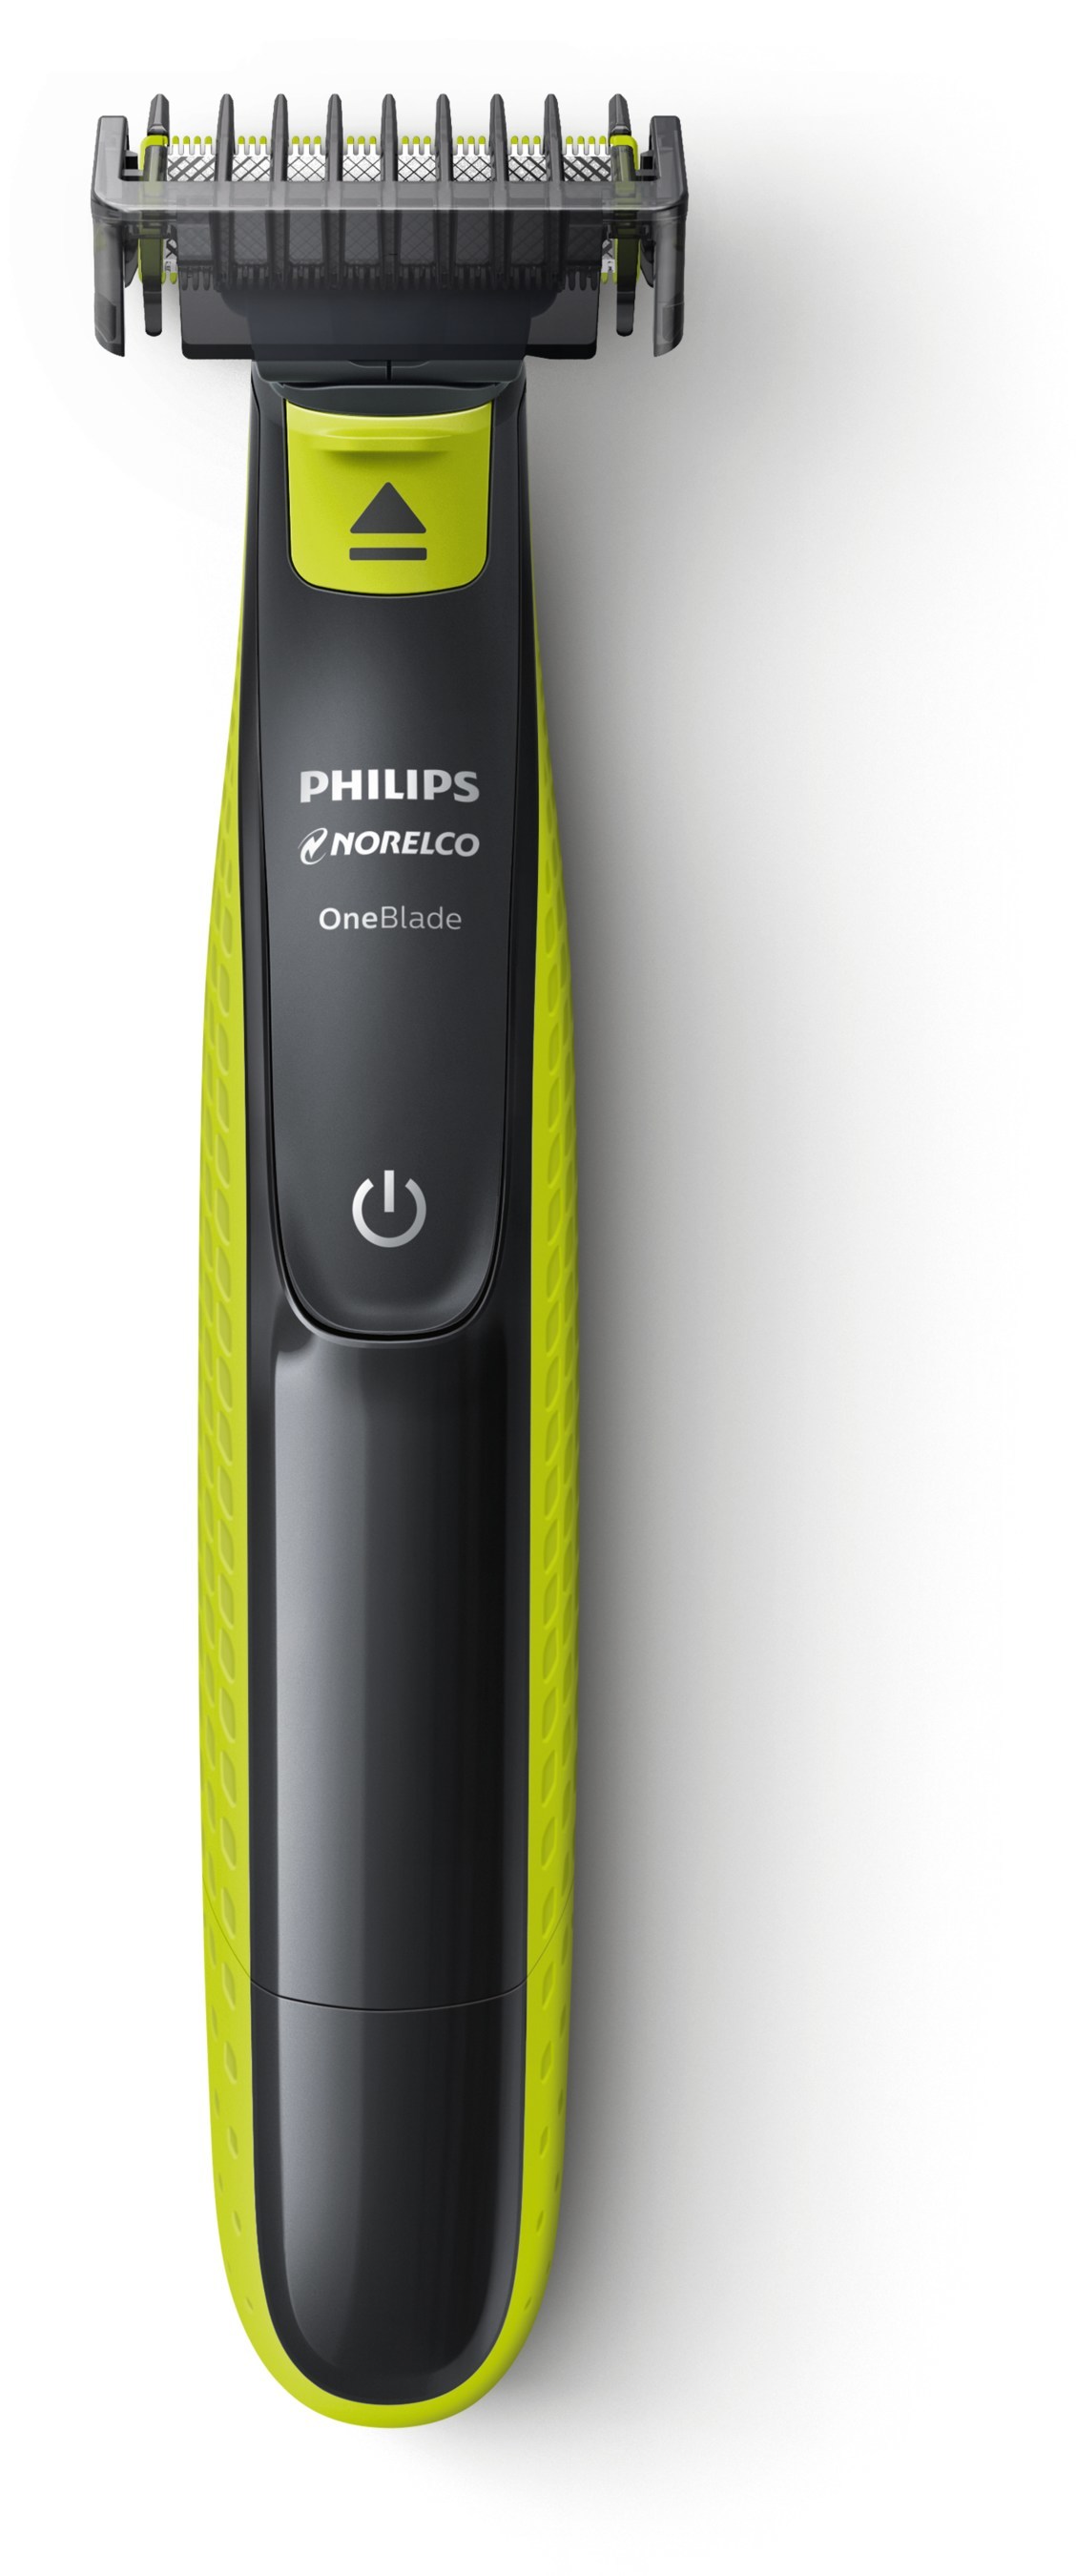 Philips Norelco OneBlade Review: Our Honest Opinion